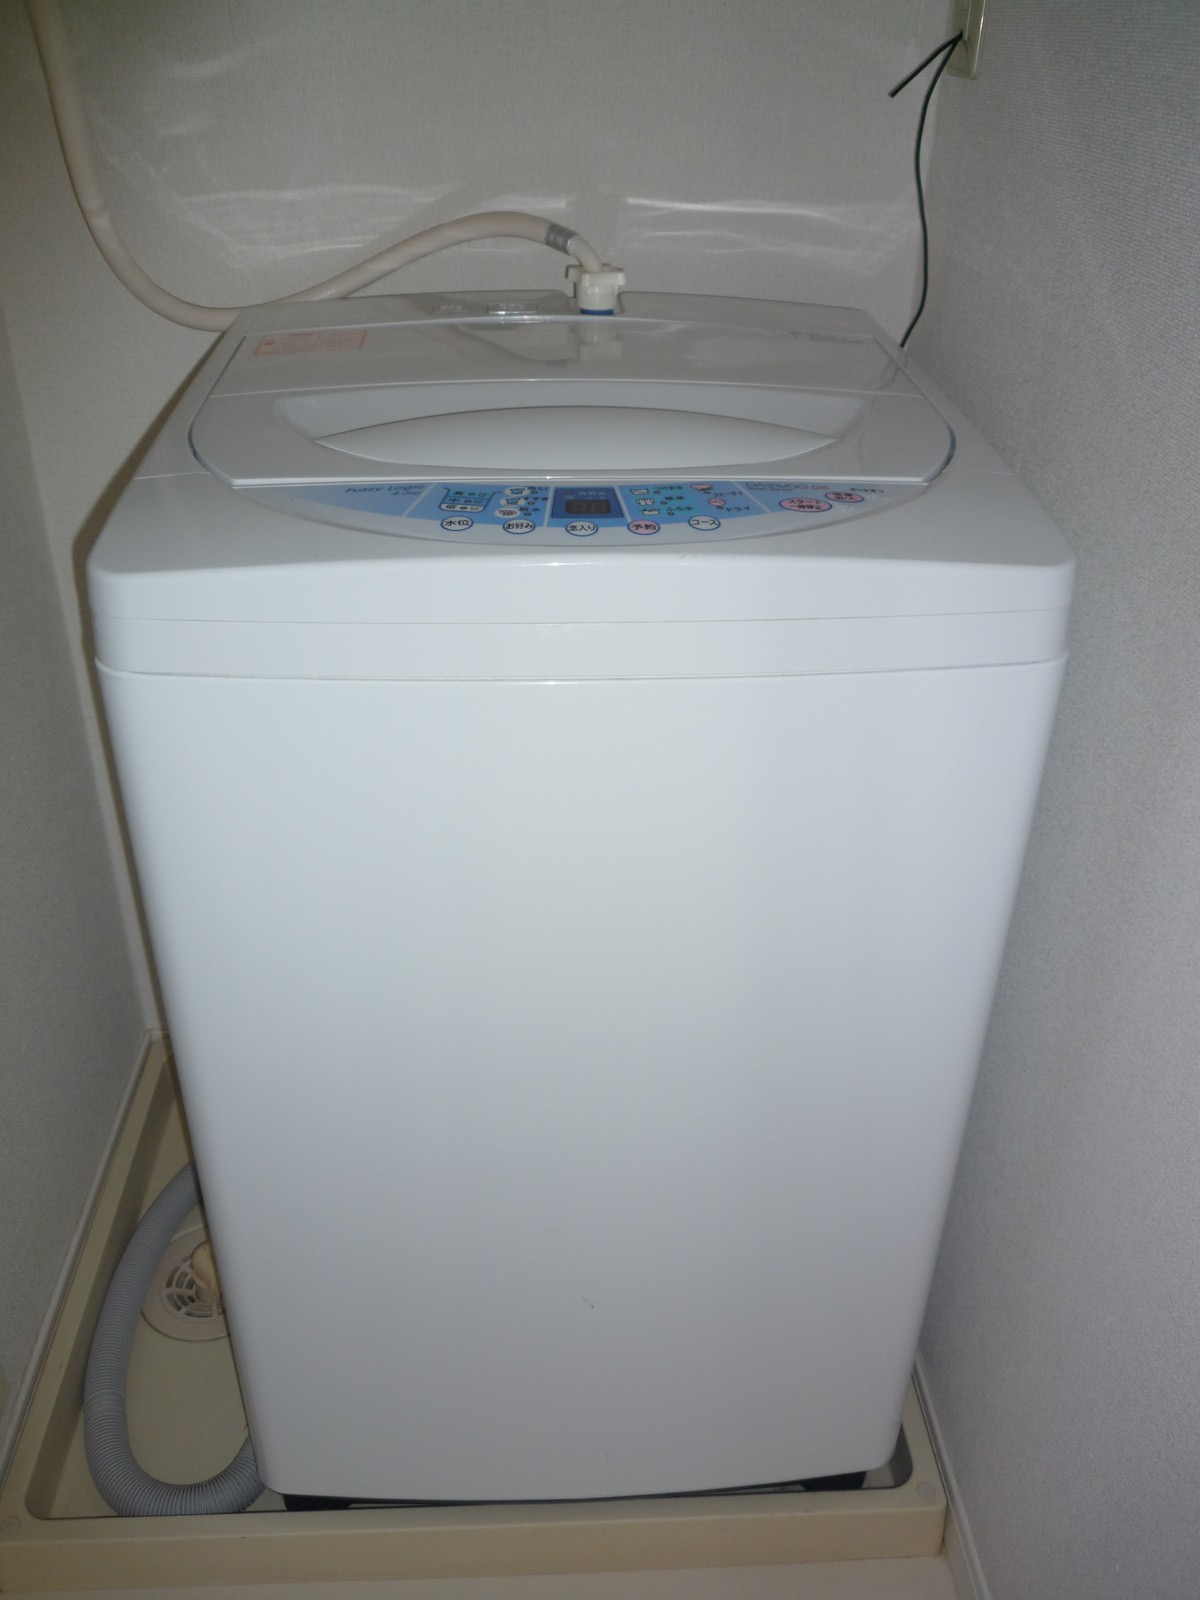 Other Equipment. It comes with Even washing machine ※ Specifications are different room